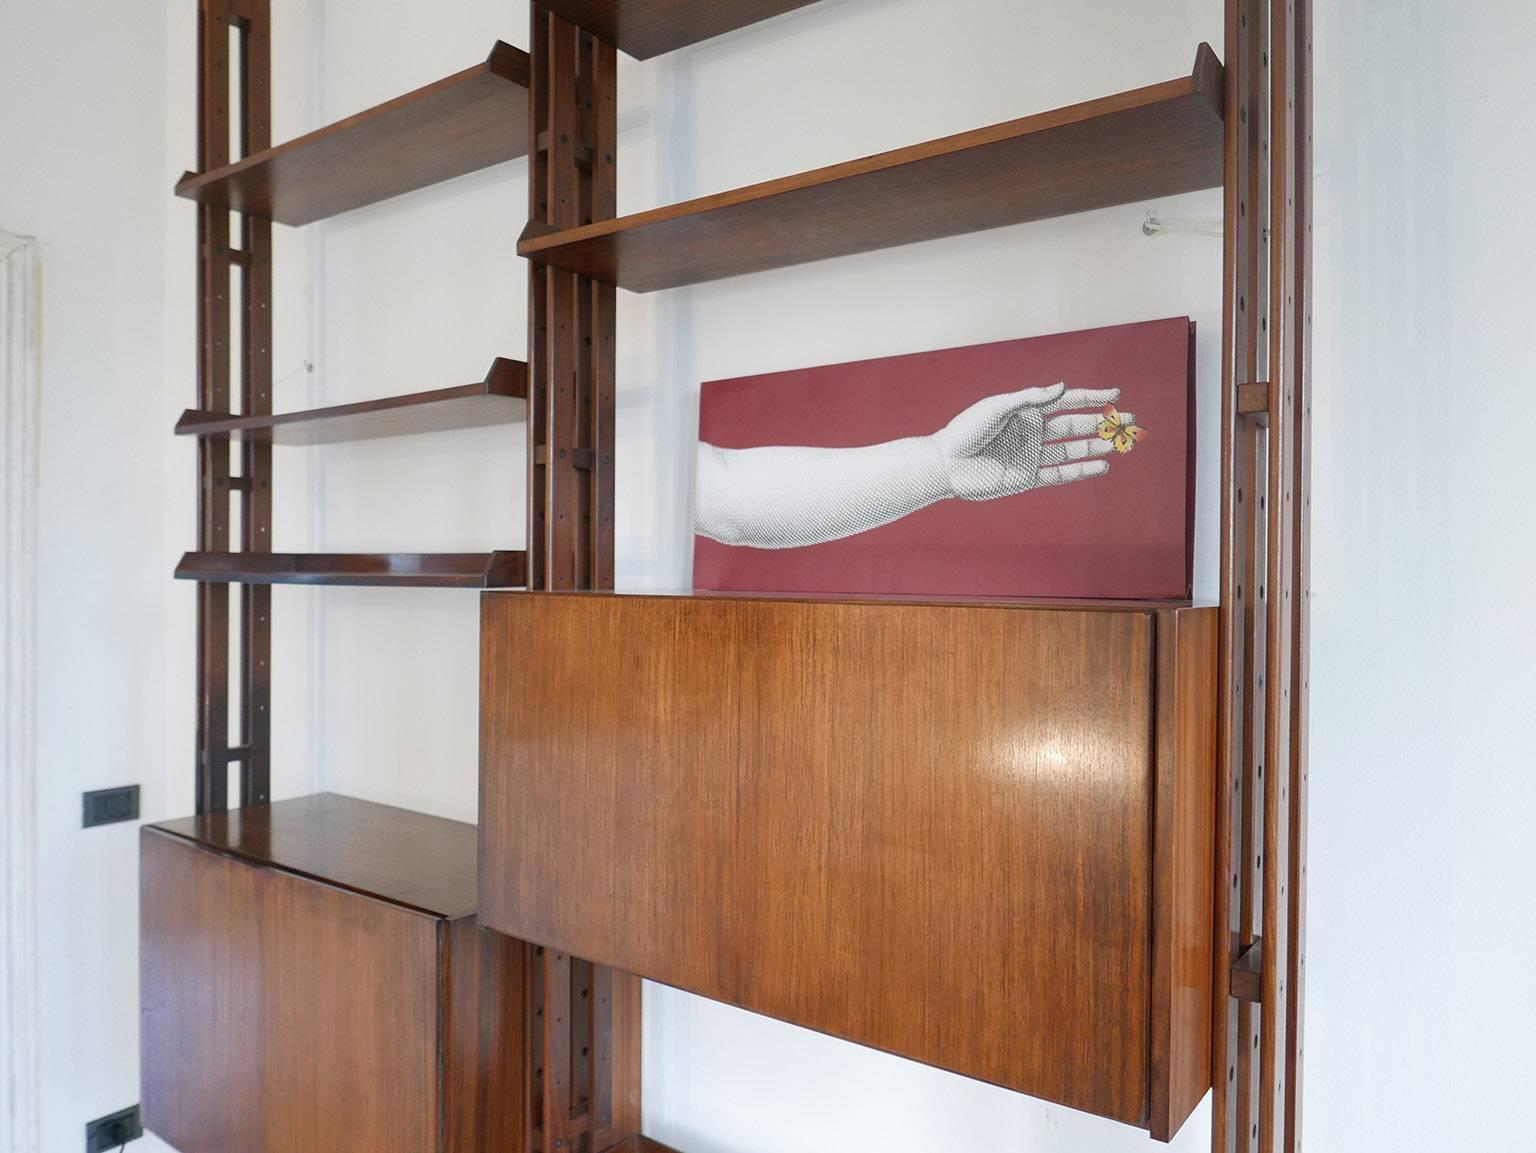 Franco Albini  LB7   Bookcase for Poggi, 1957.
Signed under the feet. 
Rosewood shelves and cabinets,
tree mahogany upright supports, six shelves and two cabinet. Adjustable black lacquered  aluminum braces at top and bottom .
Very good original